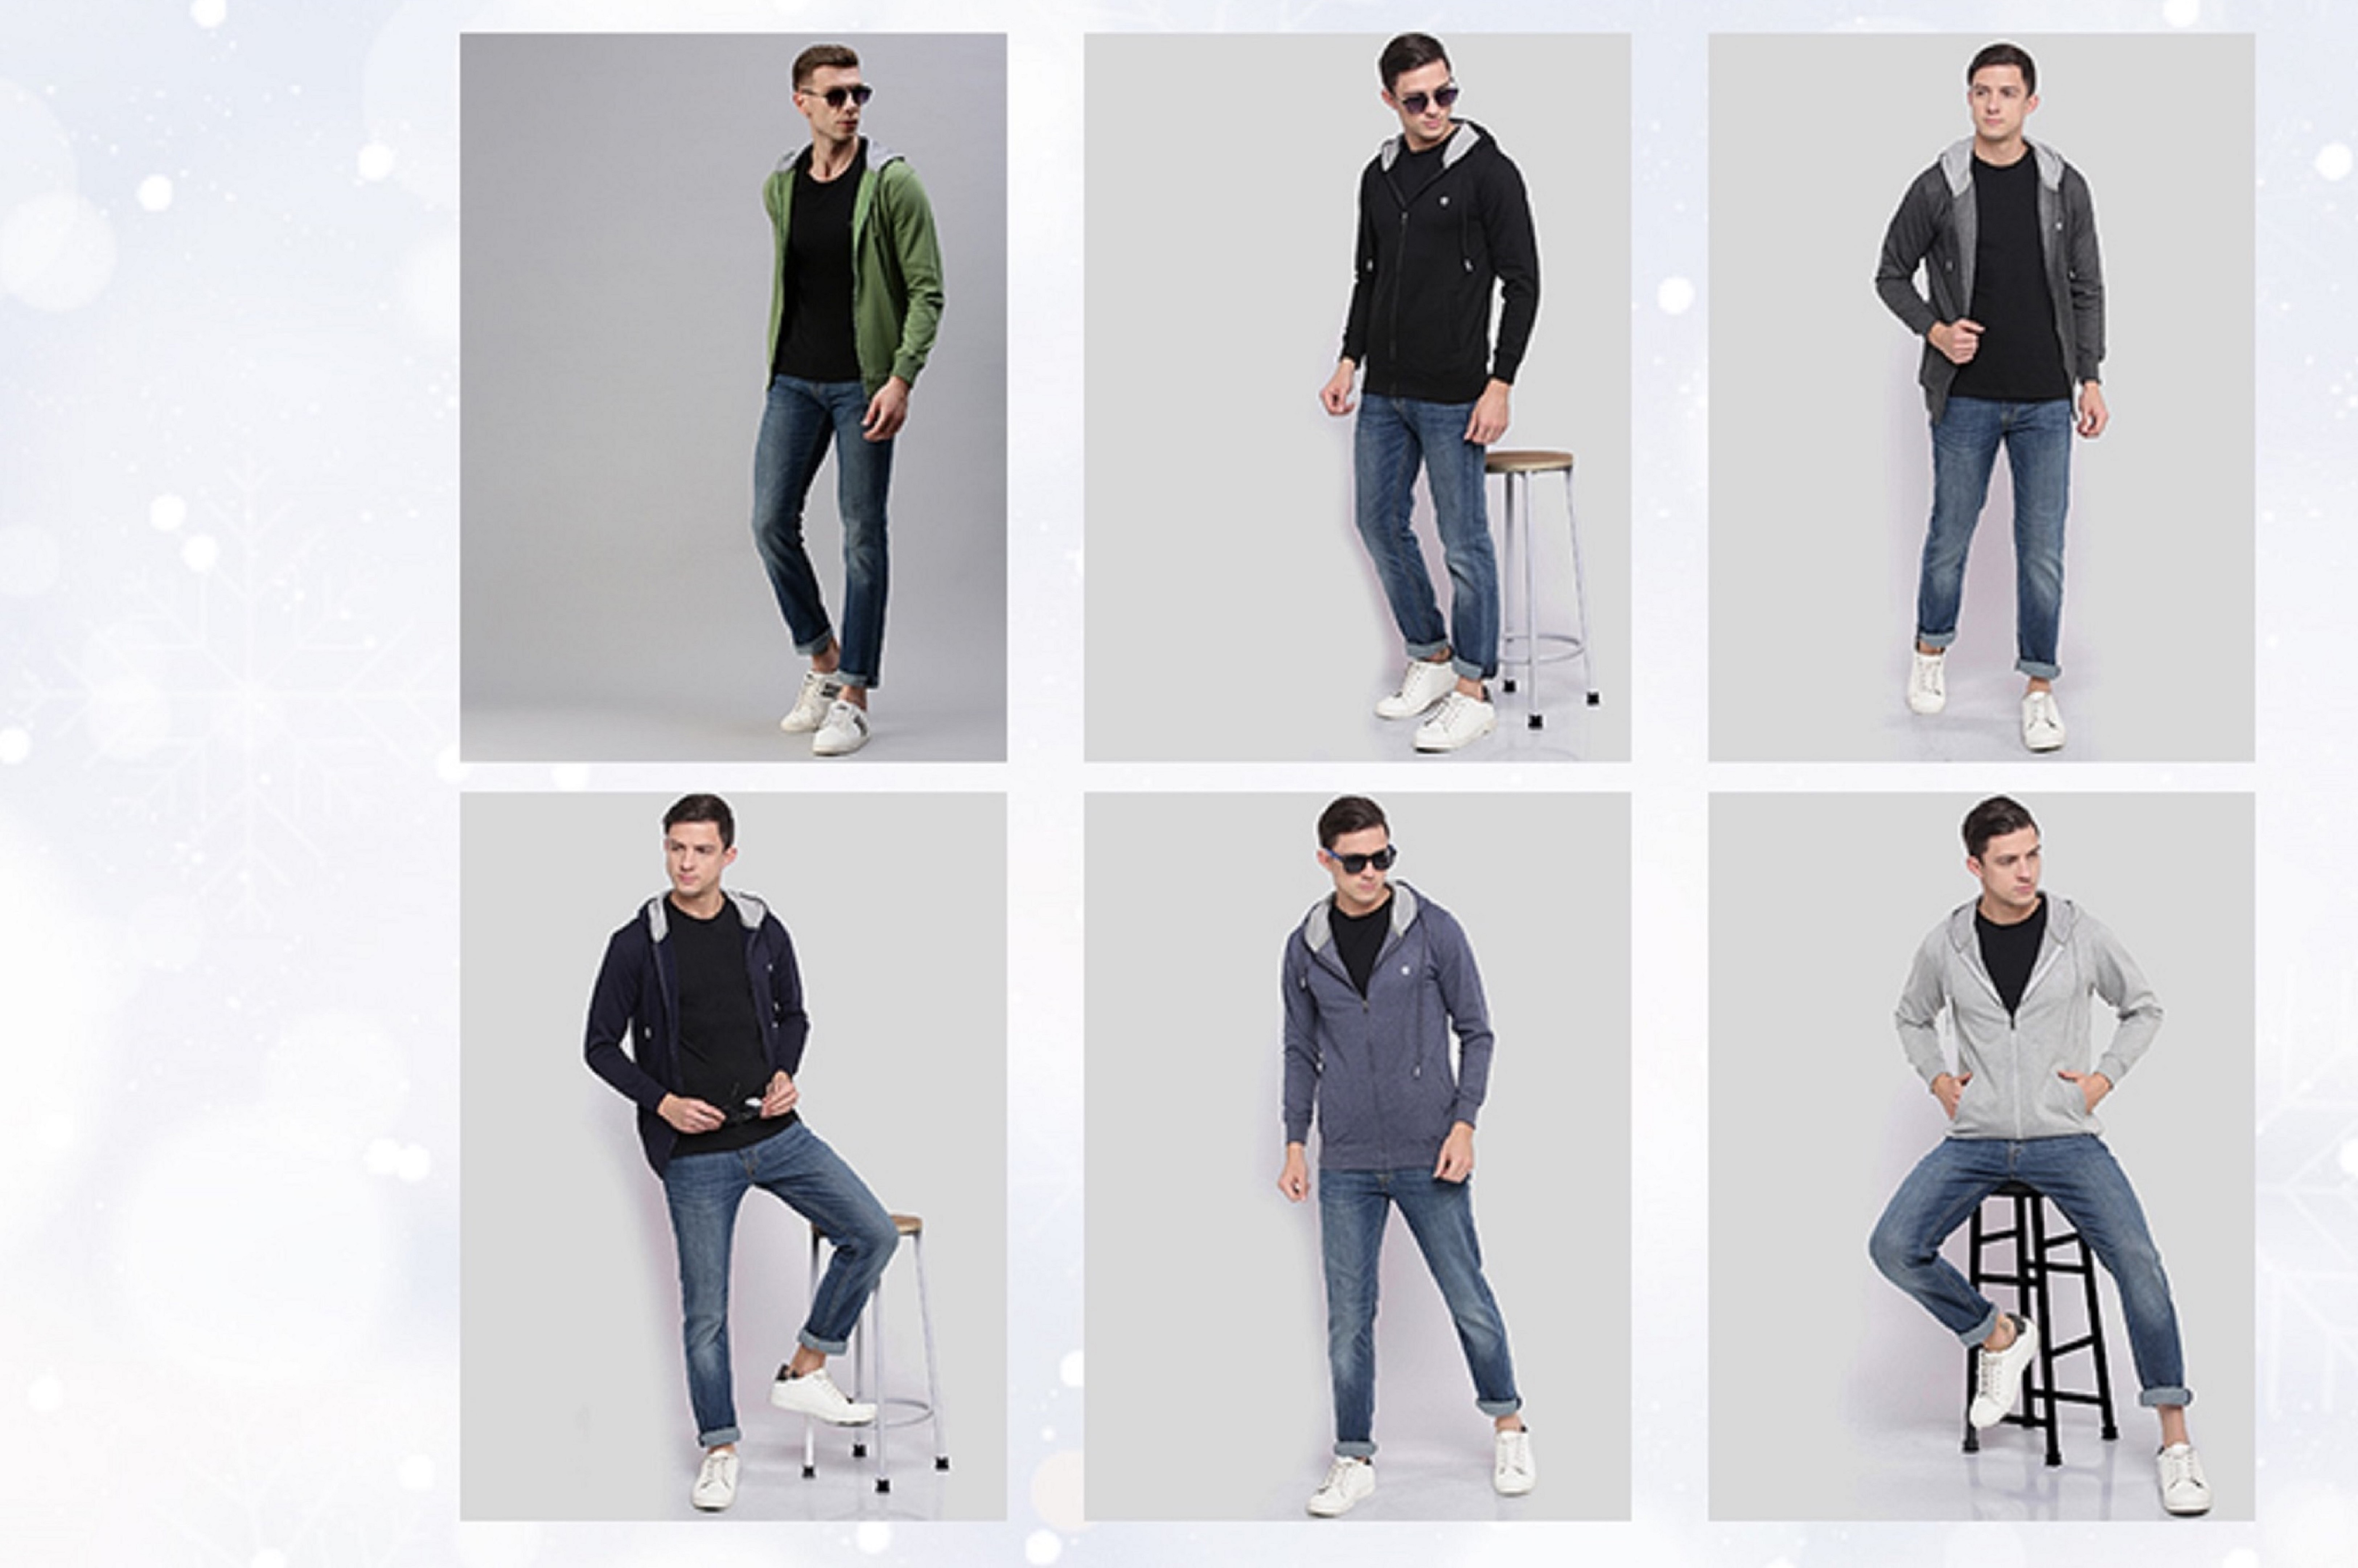 Onn Premium Wear curates an extensive line of winter clothing perfect for the chilly season